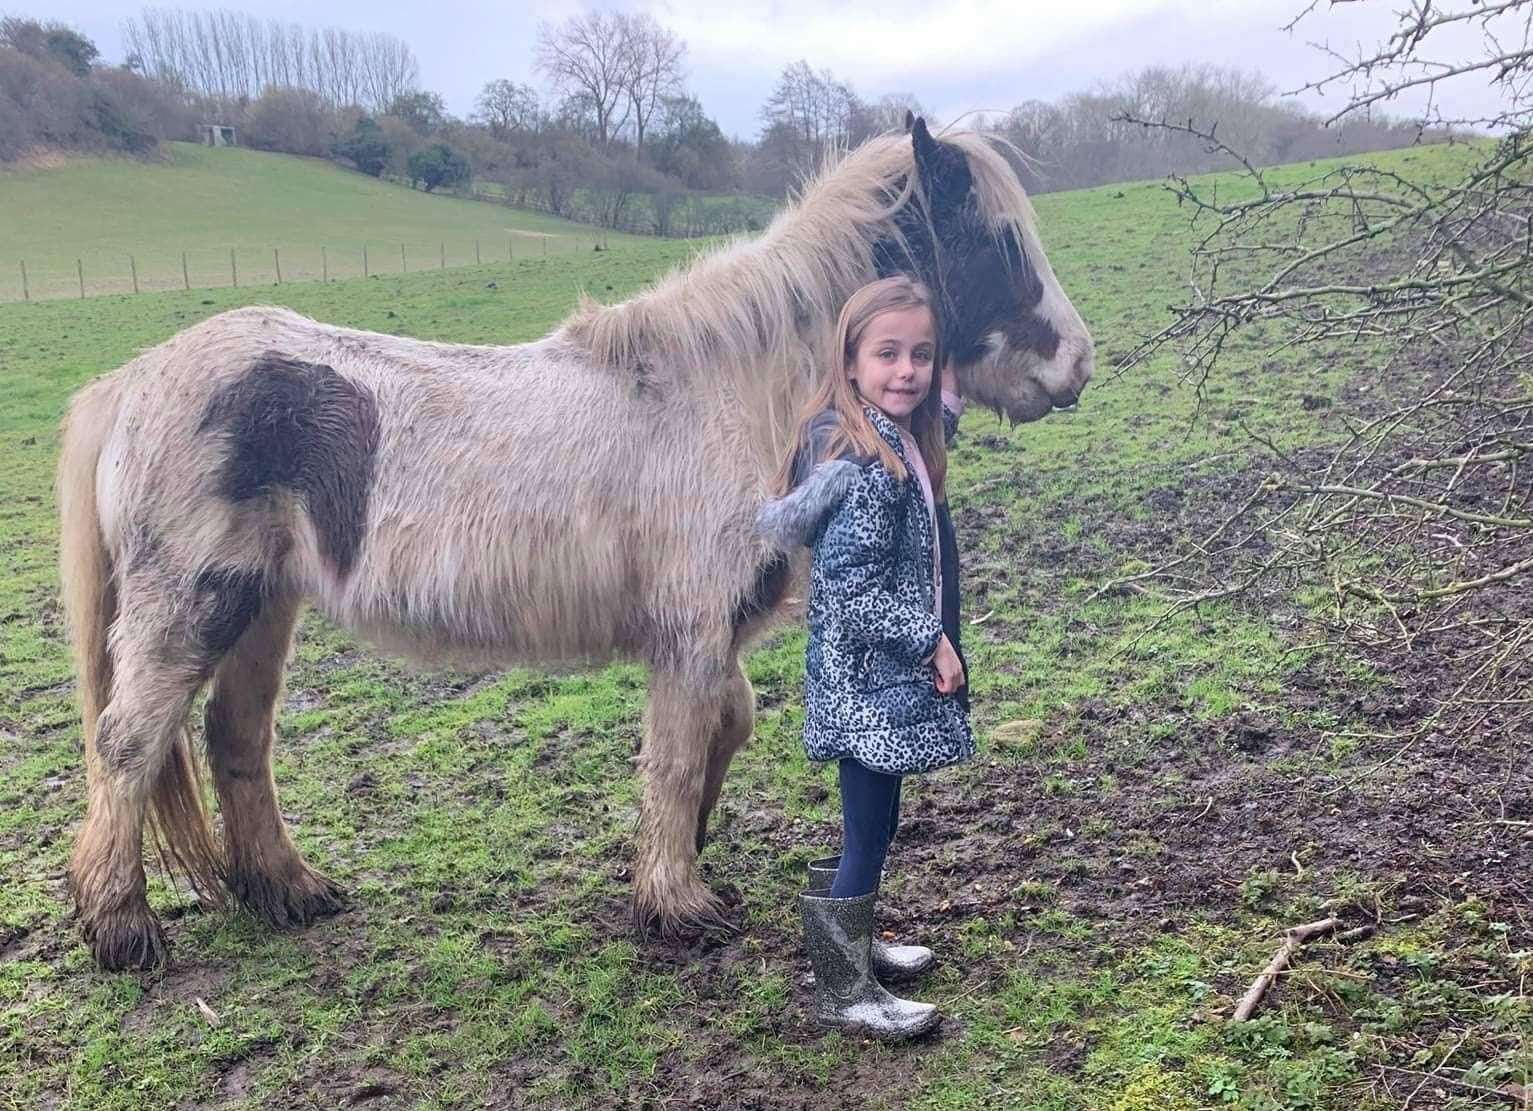 Hollie visited the ponies with her mum and sister almost every day